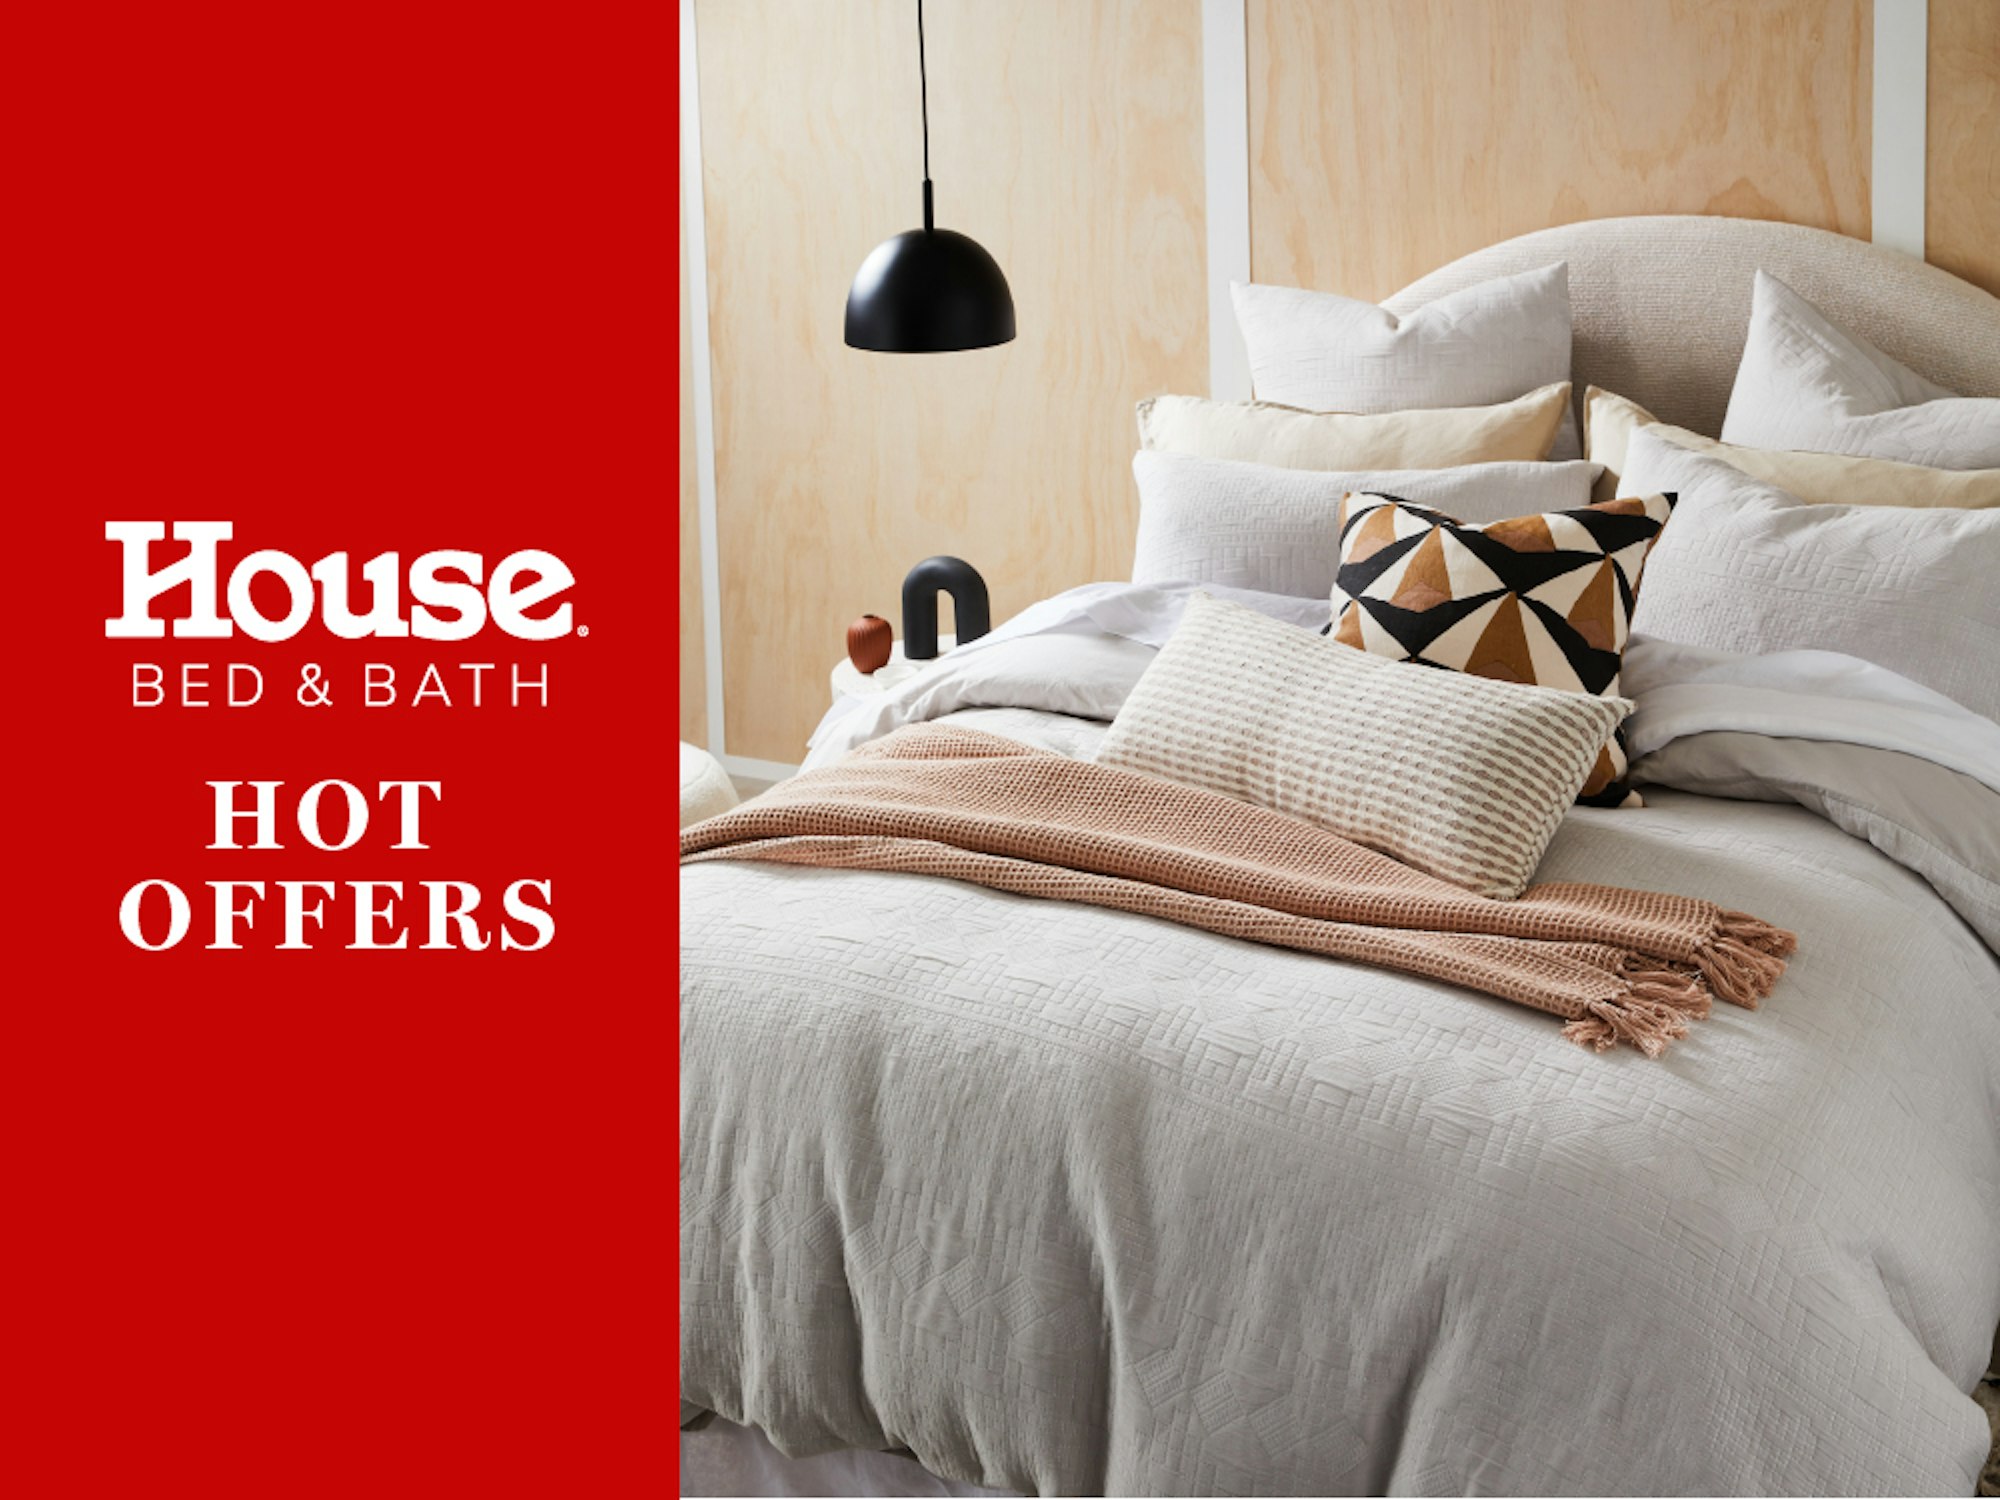 HOT HOUSE OFFERS